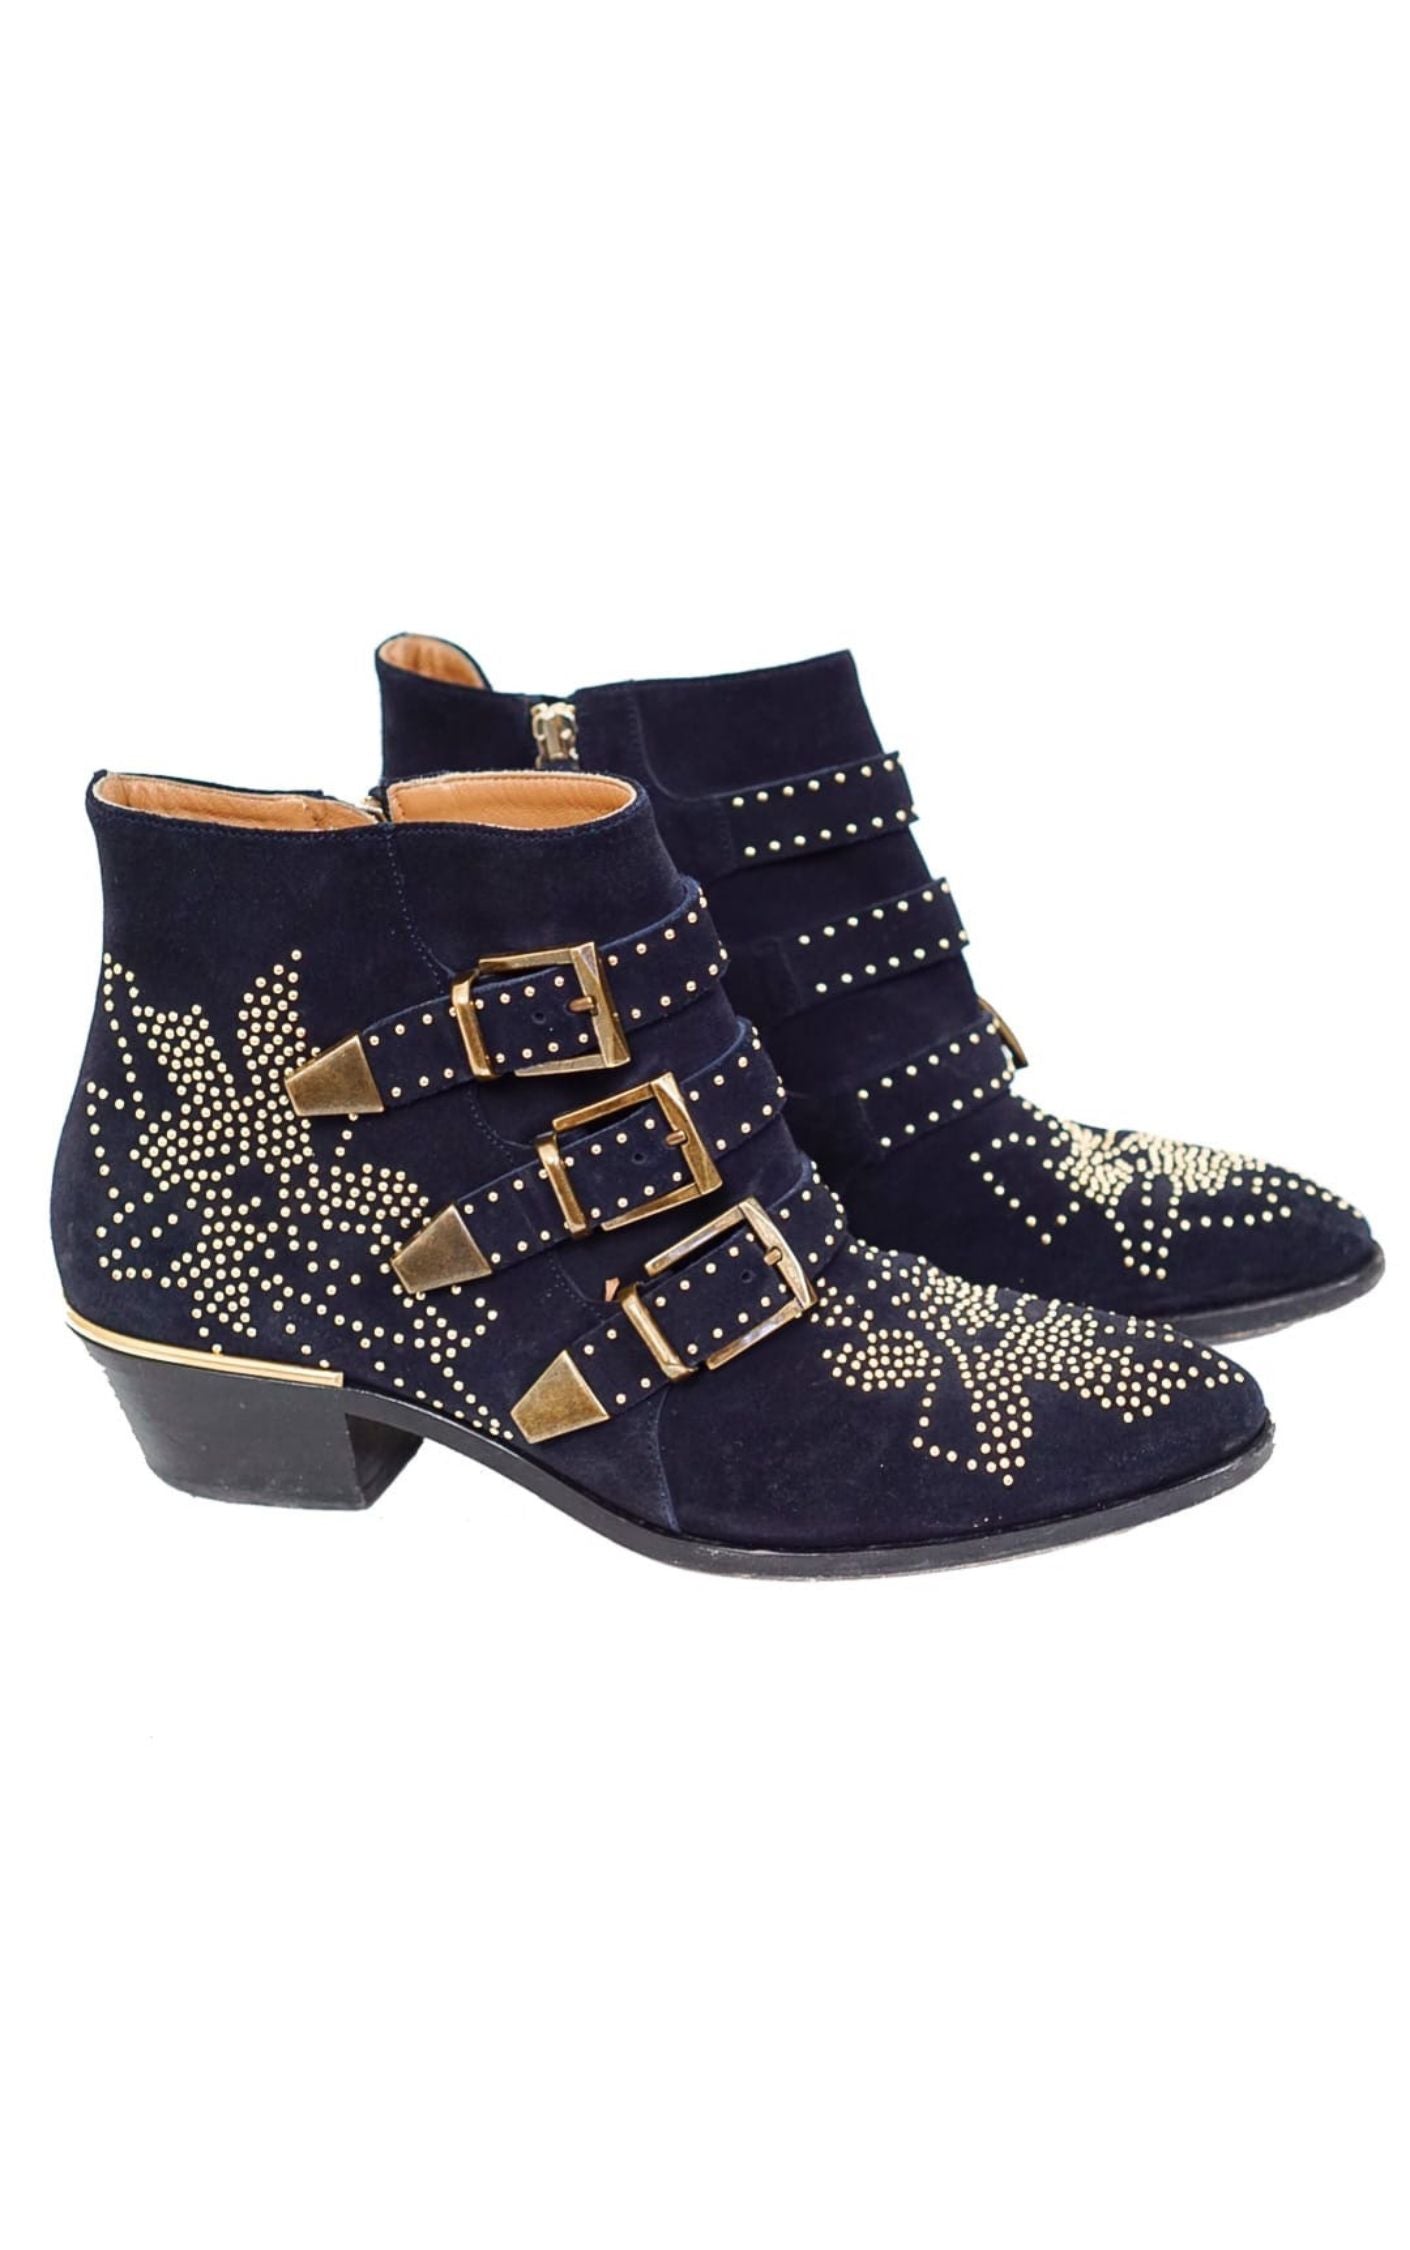 CHLOE Susanna Studded Suede Boots resellum